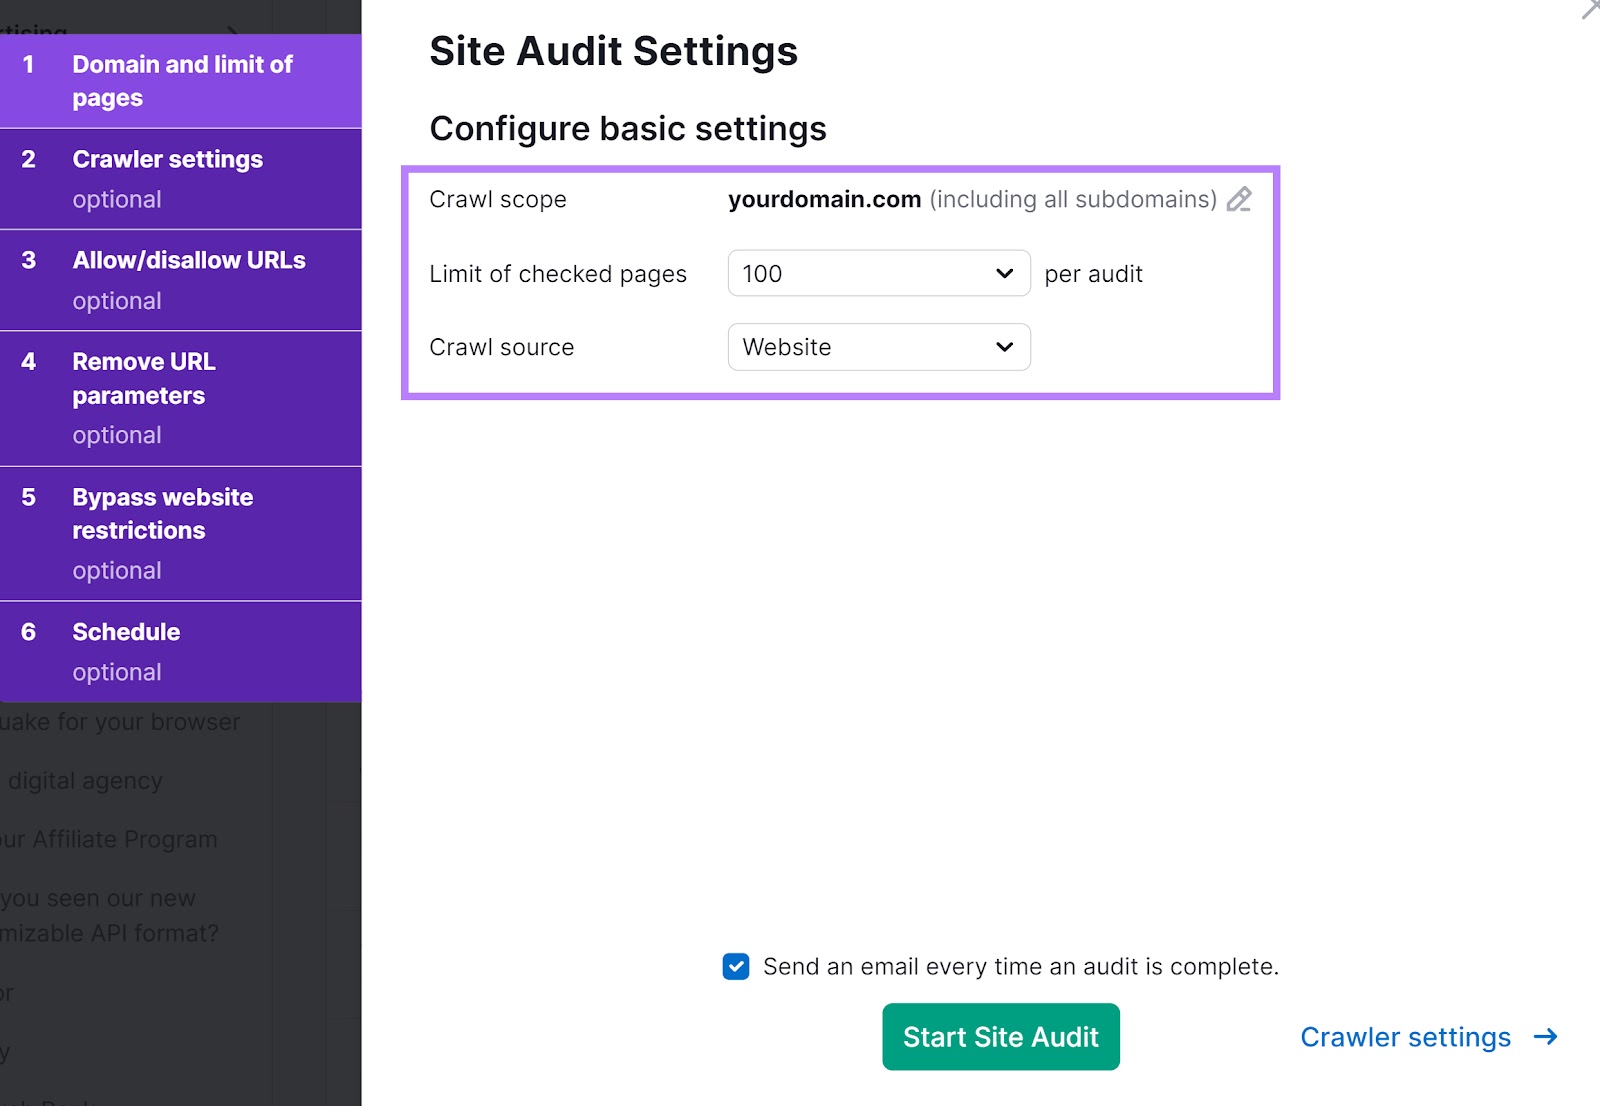 "Site Audit Settings" window with the "Configure basic settings" section highlighted.